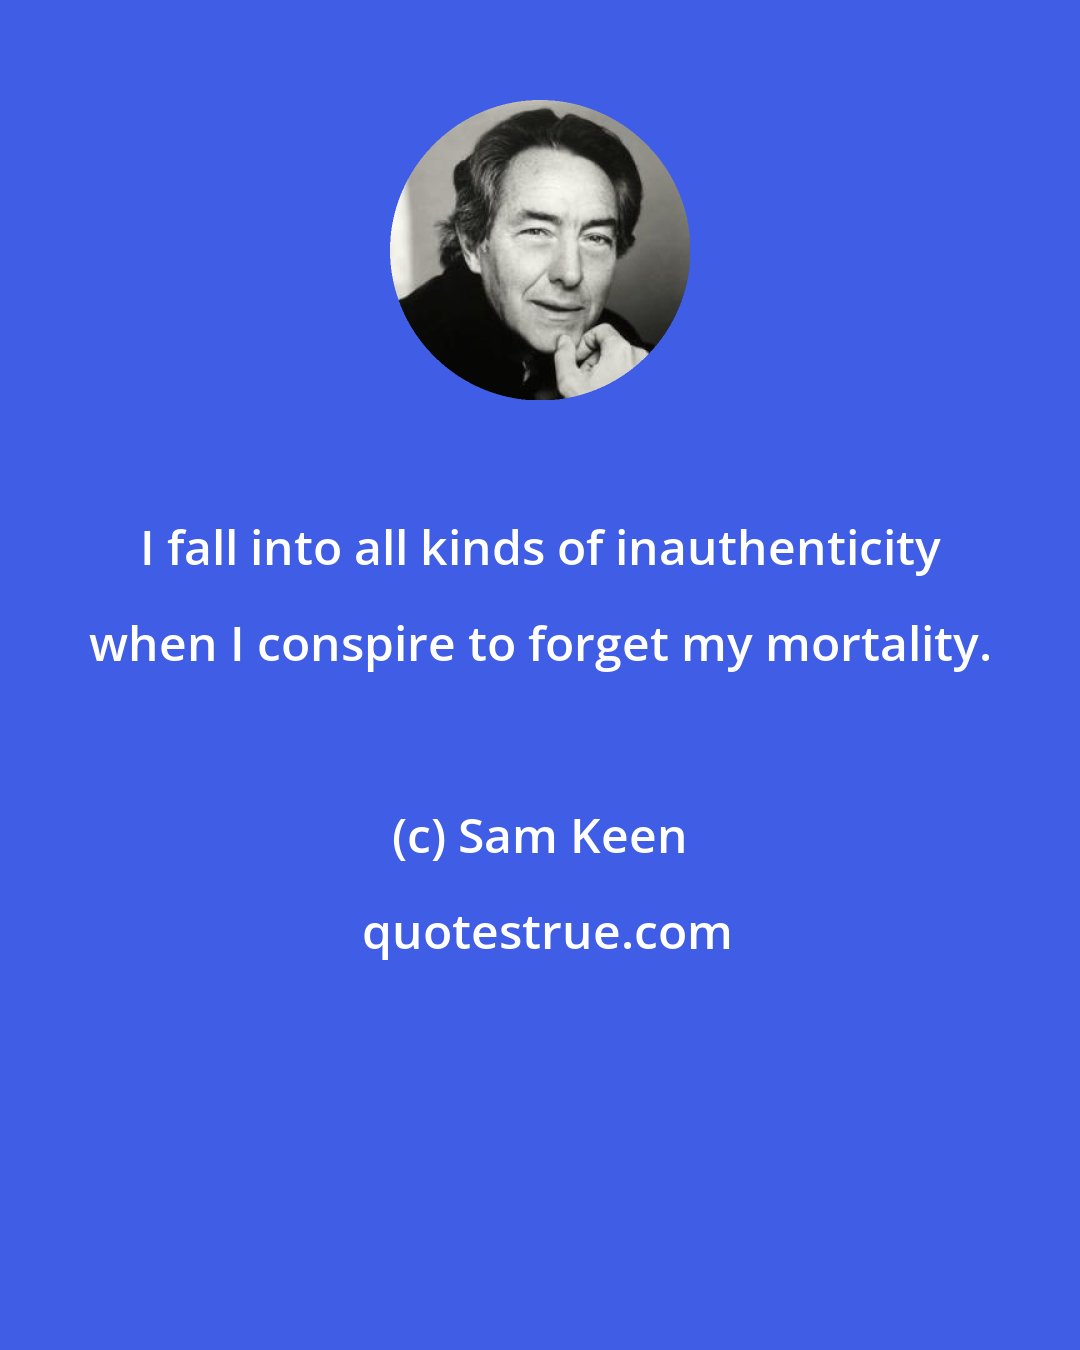 Sam Keen: I fall into all kinds of inauthenticity when I conspire to forget my mortality.